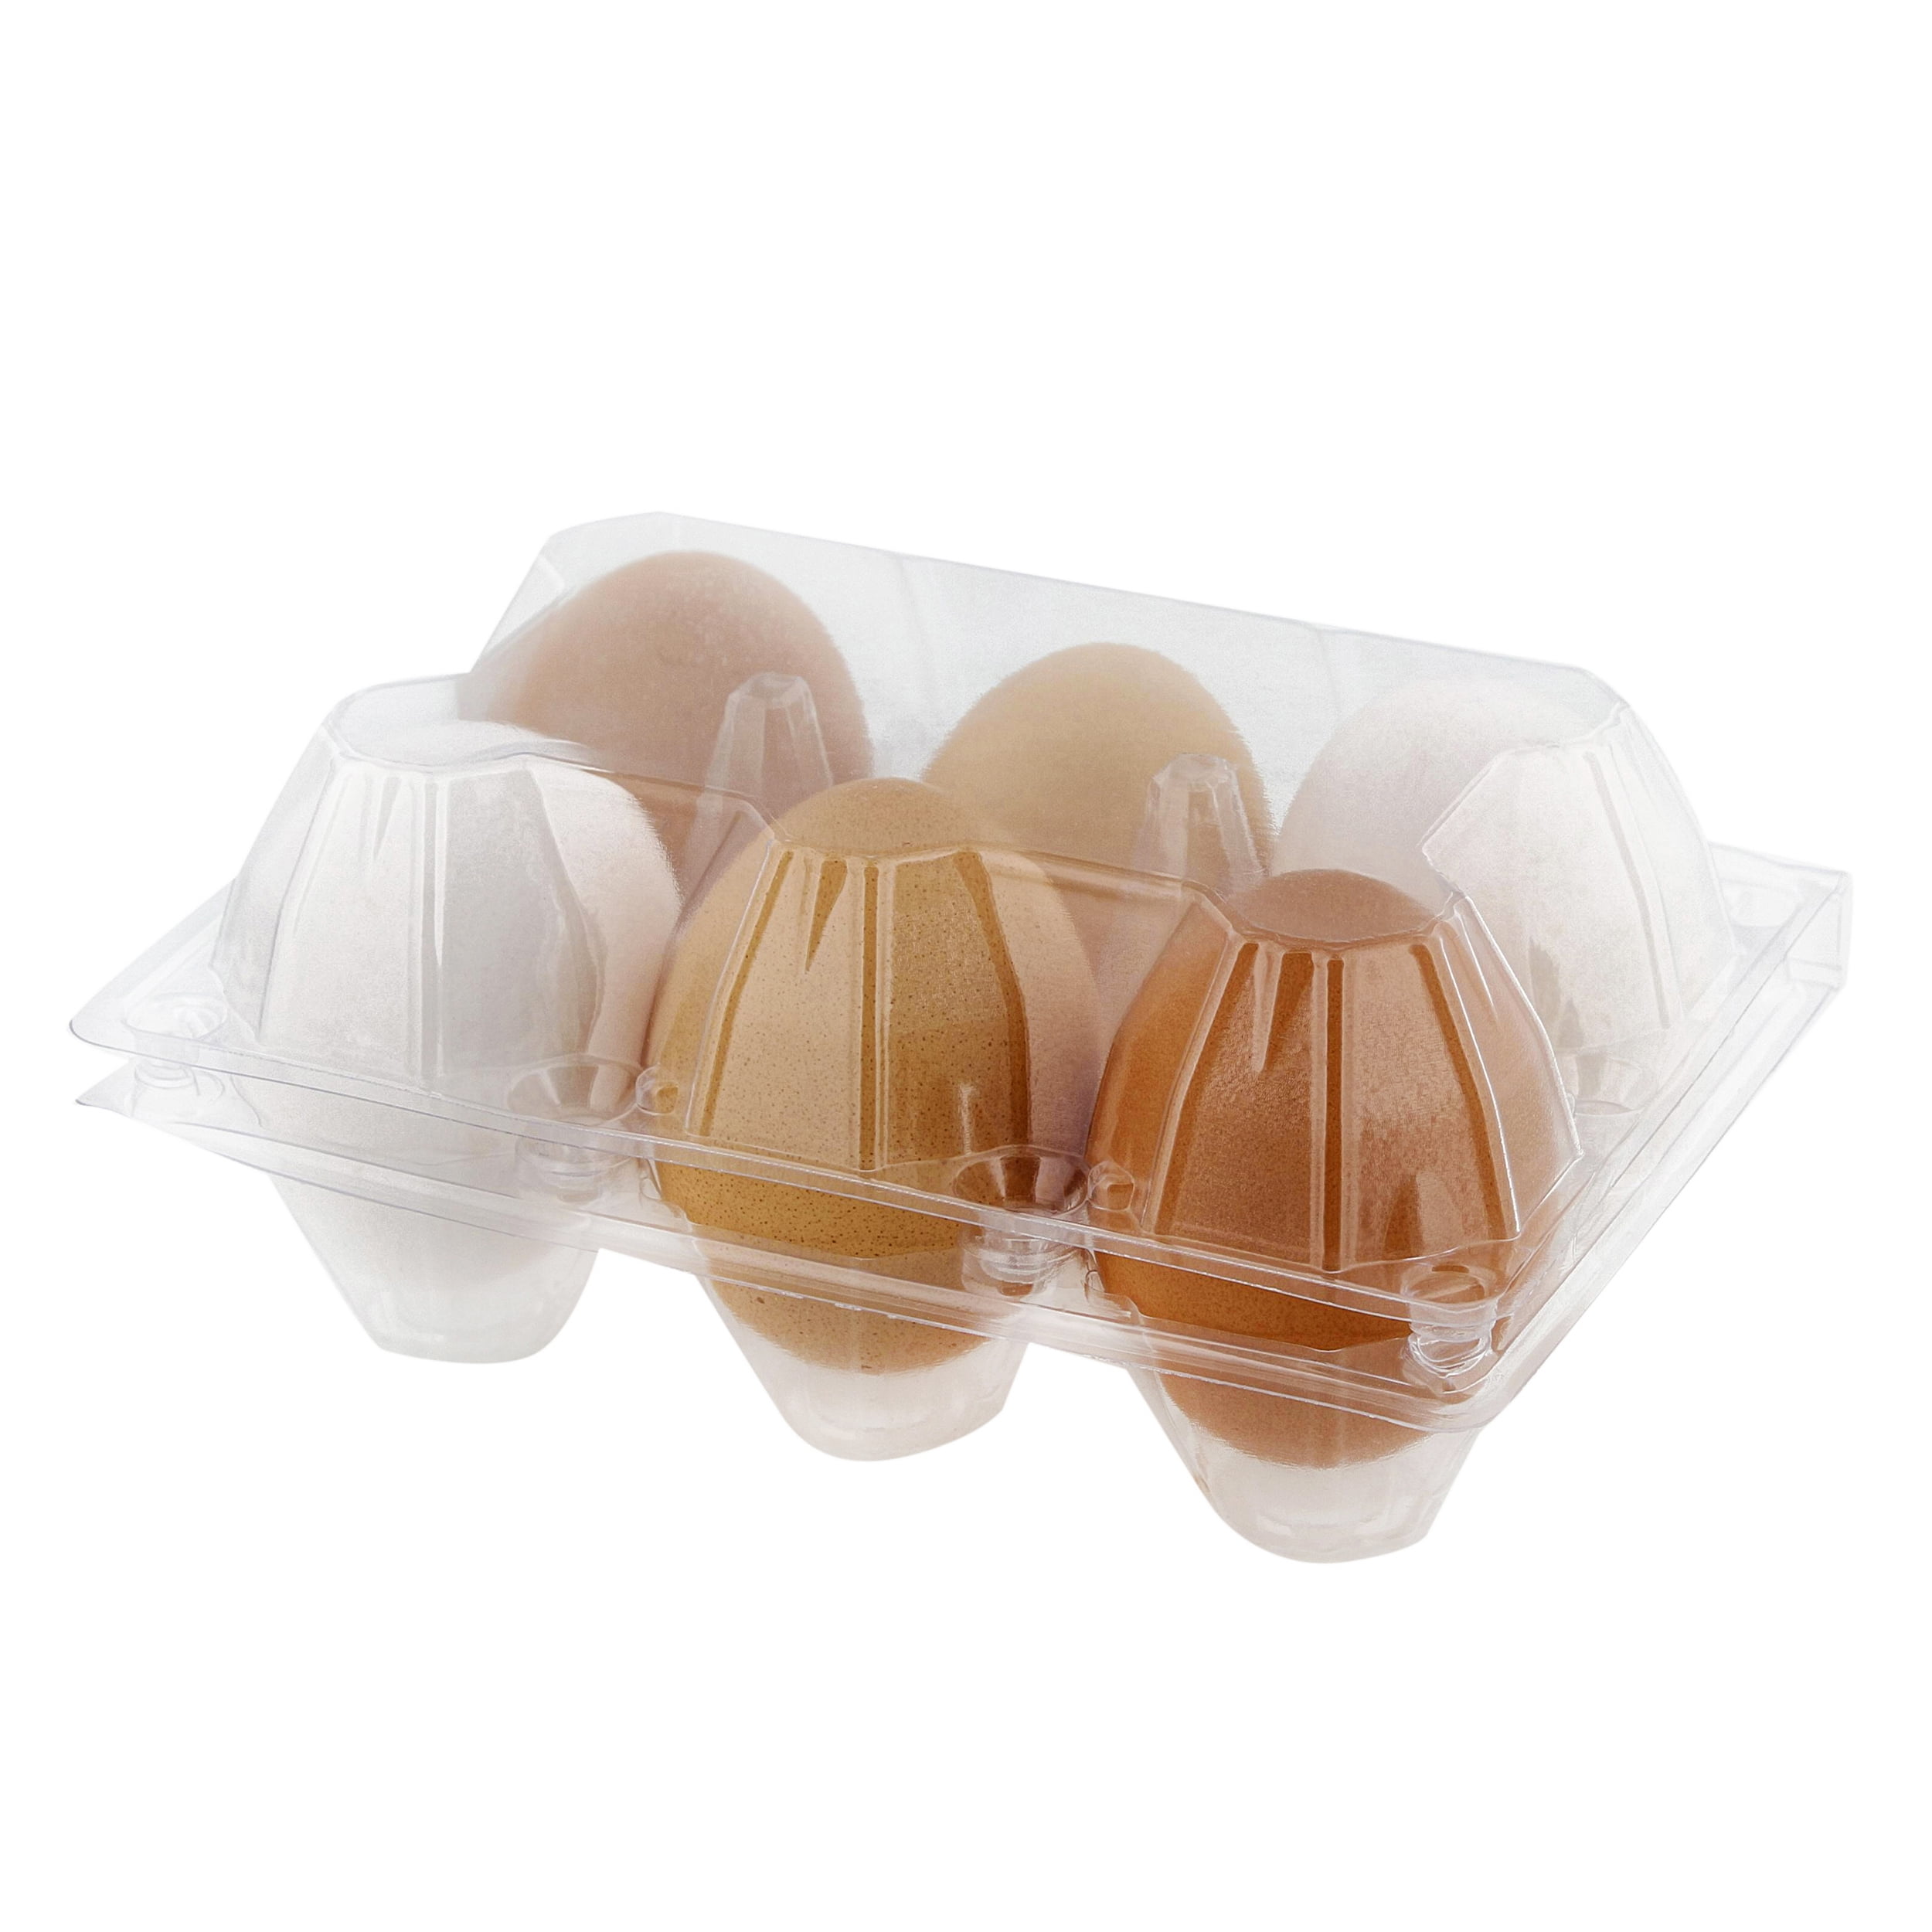 6 Pack Plastic Egg Trays, Each Holds 30 Eggs(#1) for Home Chicken Farmers,  Stackable Egg Cartons Hold Multiple Eggs, Great for Storing, Sorting, and